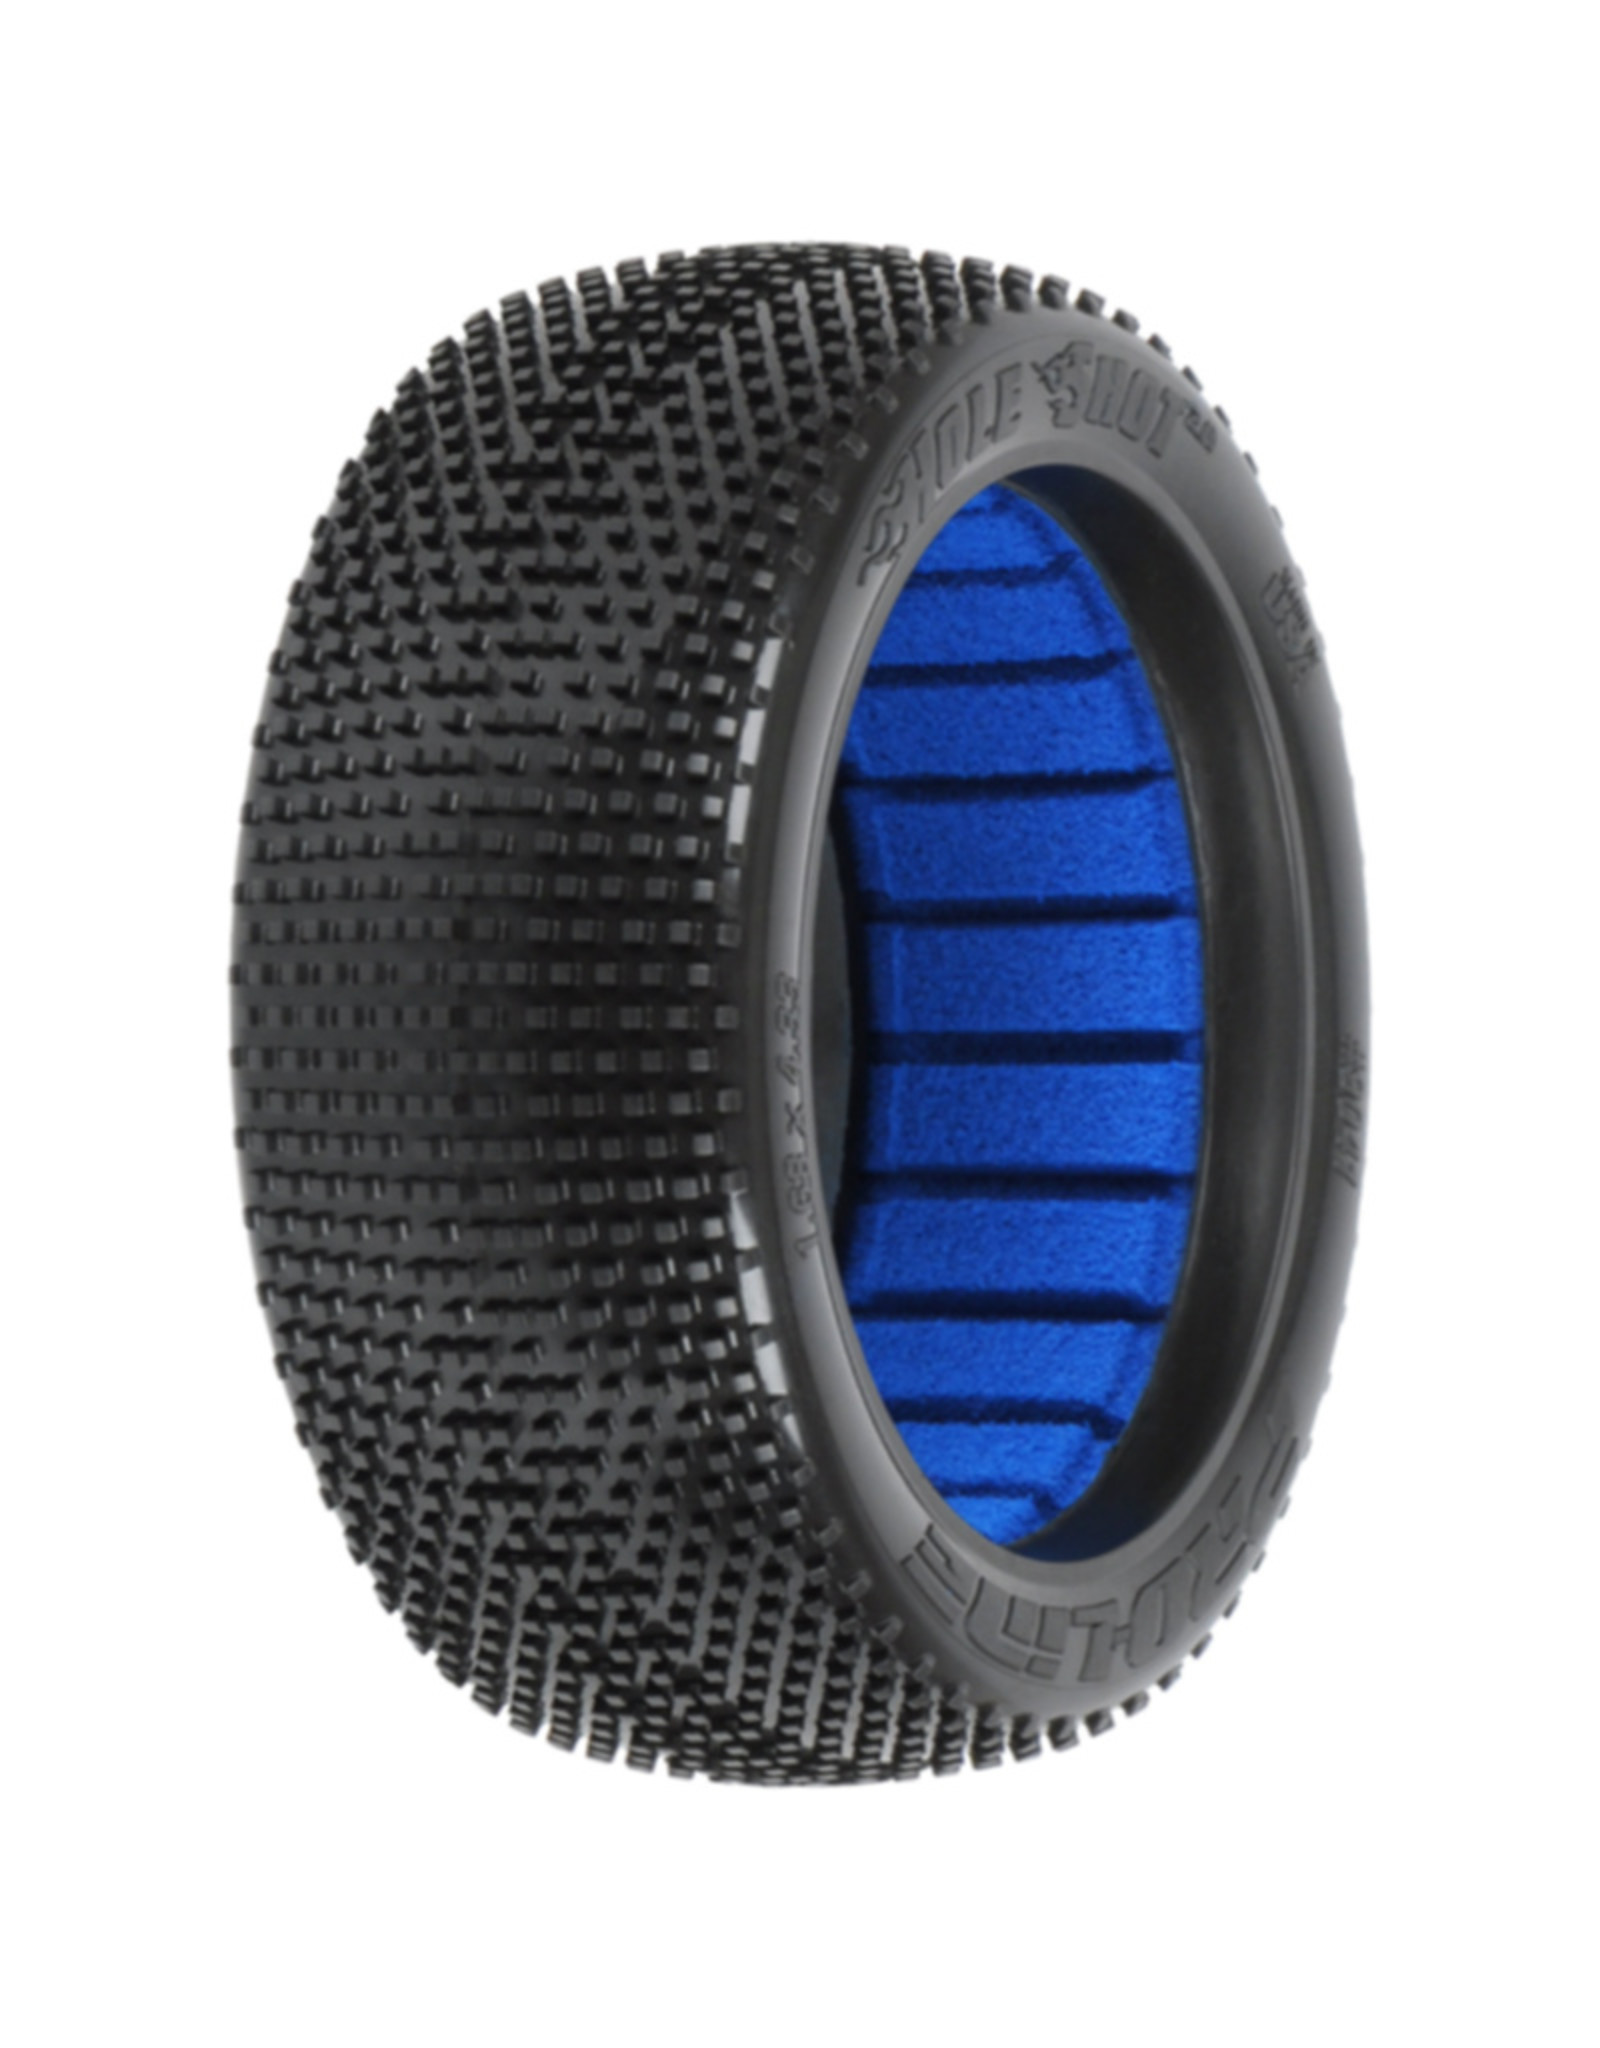 Pro-Line Racing PRO9041203 1/8 Hole Shot 2.0 S3 Soft Off-Road Tire:Buggy(2)